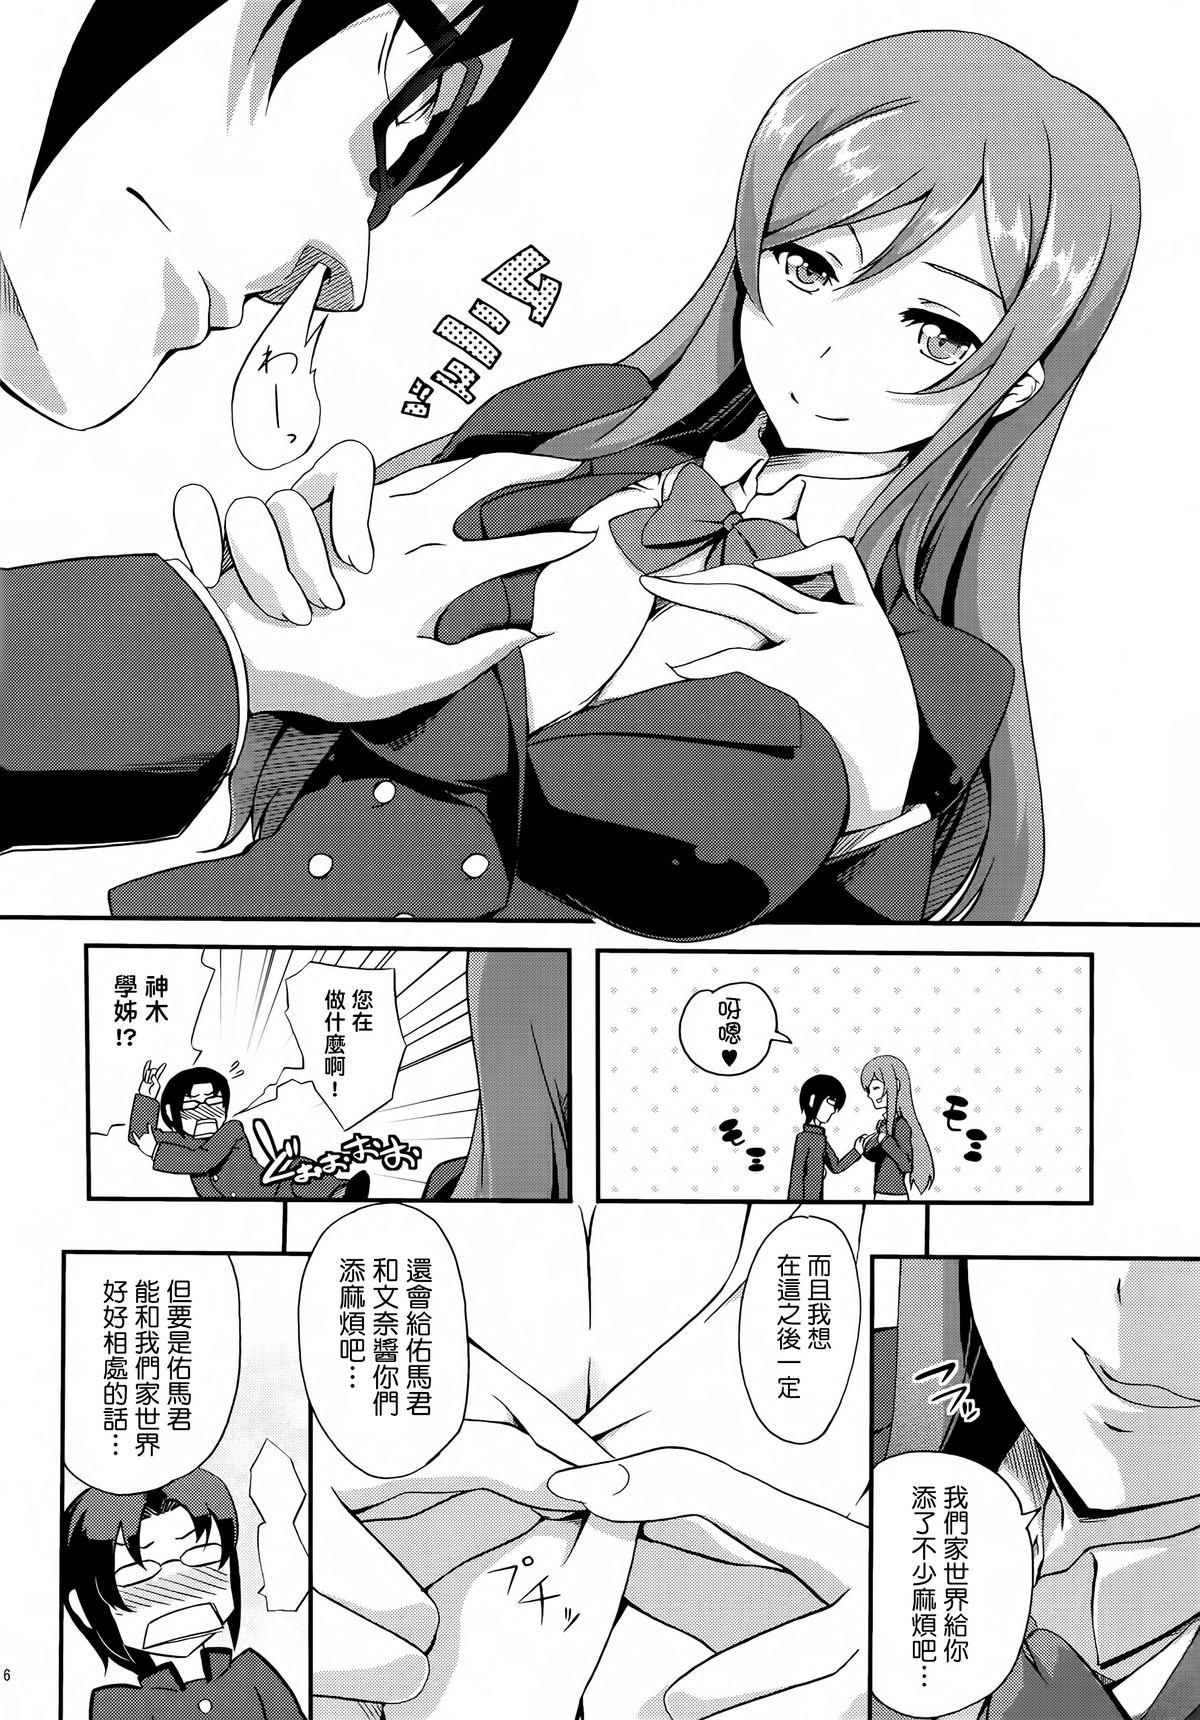 Foreplay Mirai no Onegai - Gundam build fighters try Plump - Page 6